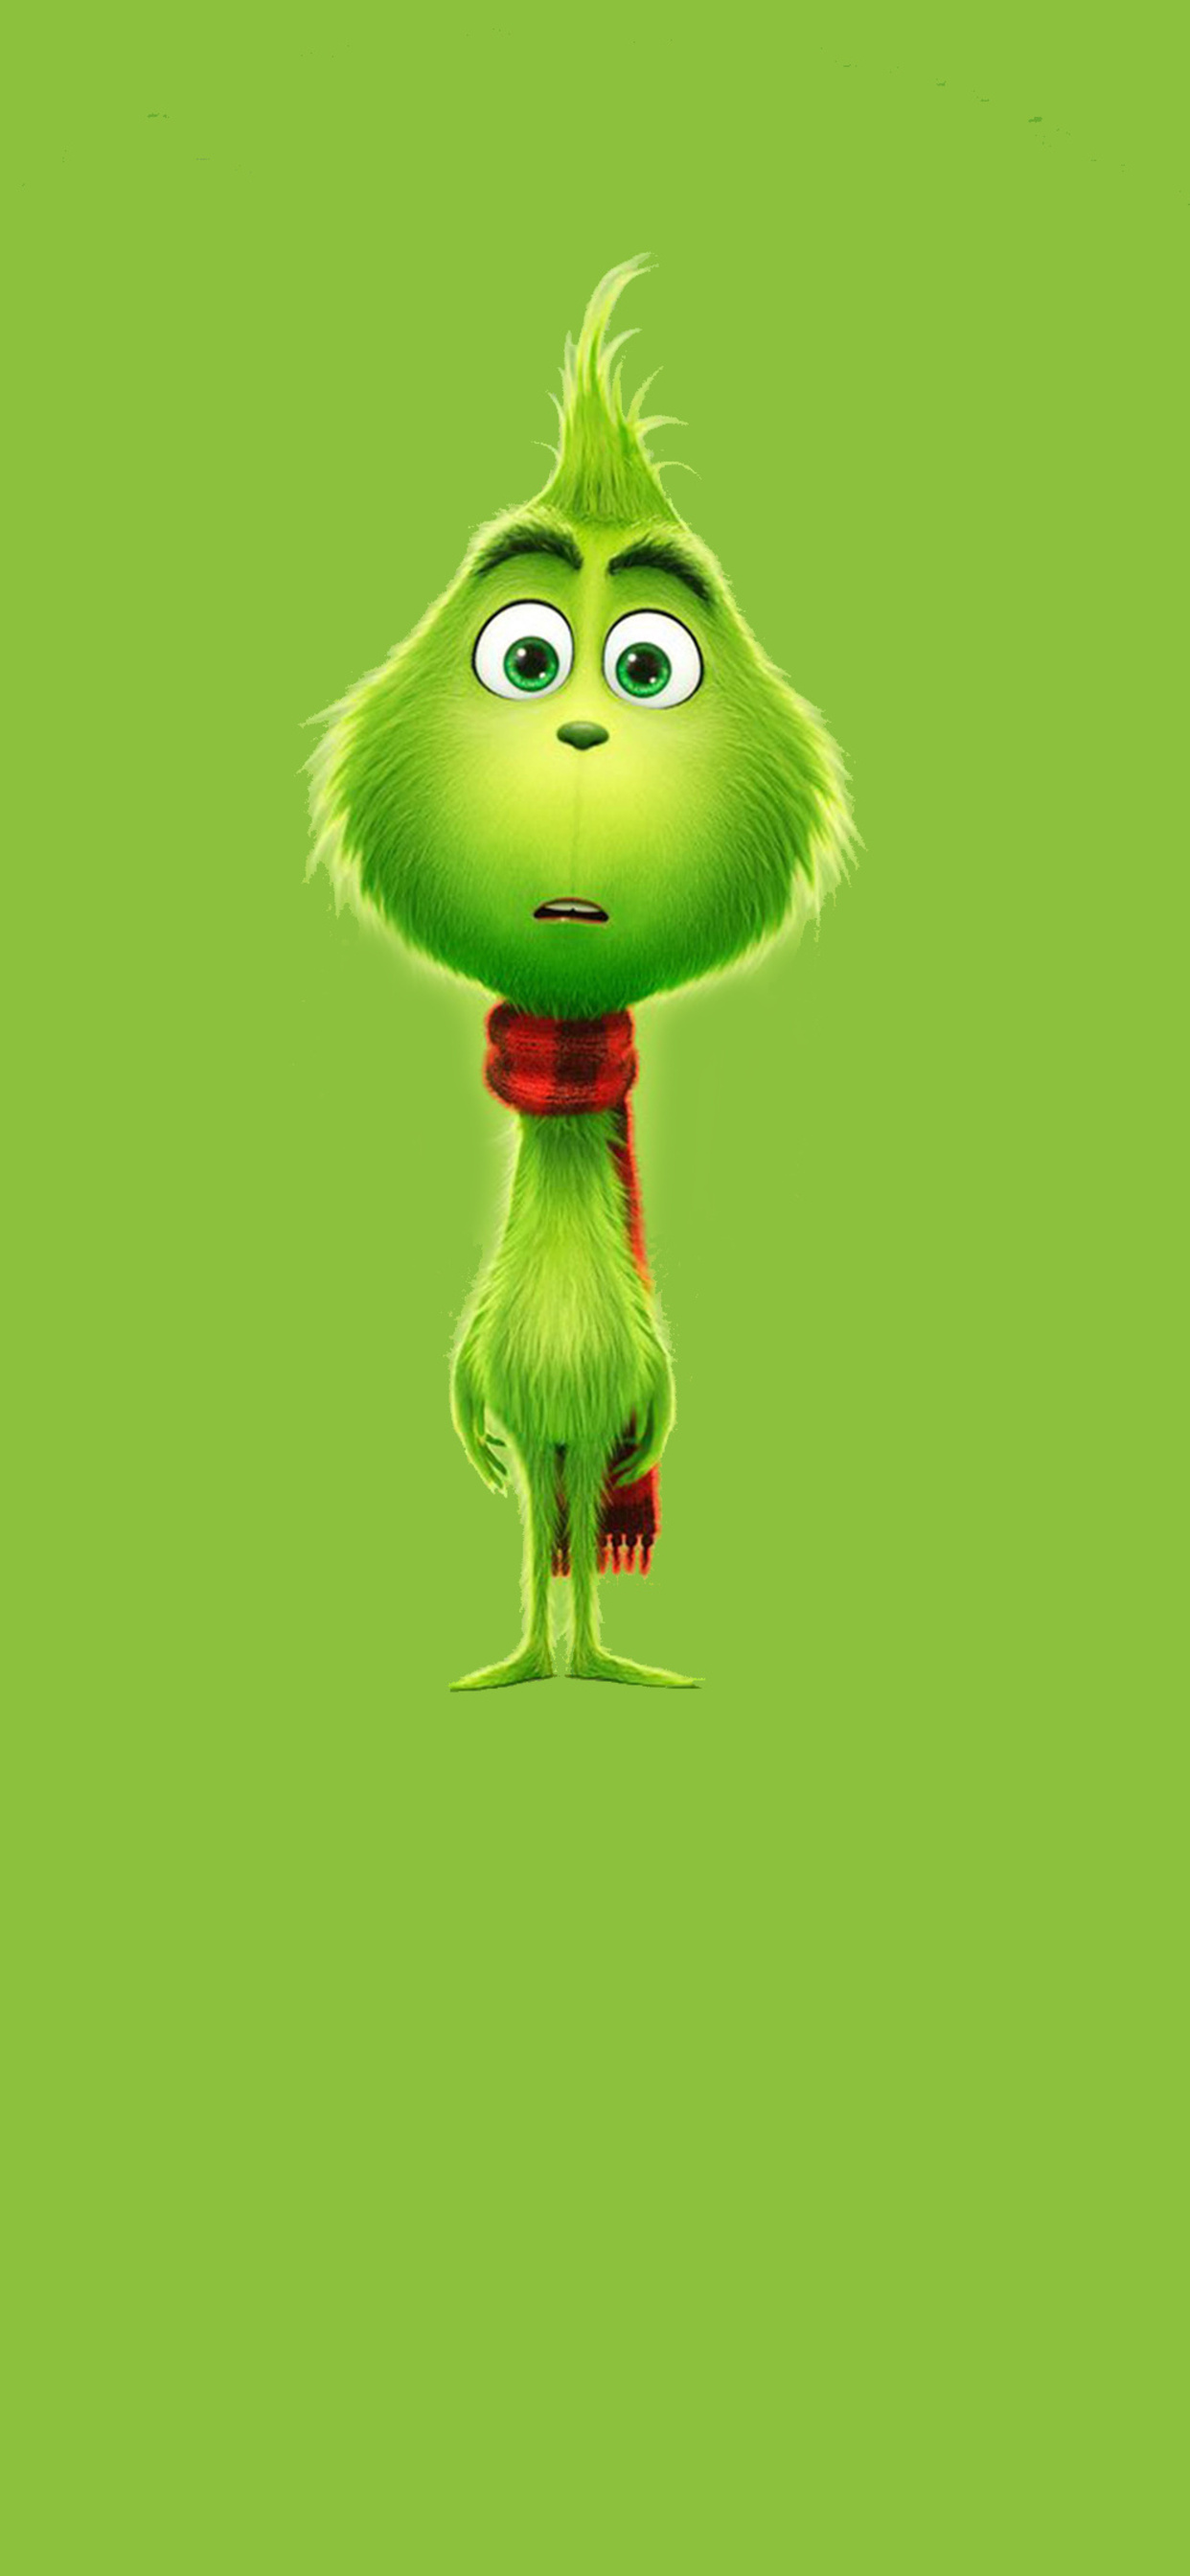 Grinch iPhone wallpaper iPhone background Christmas wallpaper   Christmas phone wallpaper Wallpaper iphone christmas Christmas wallpaper  backgrounds